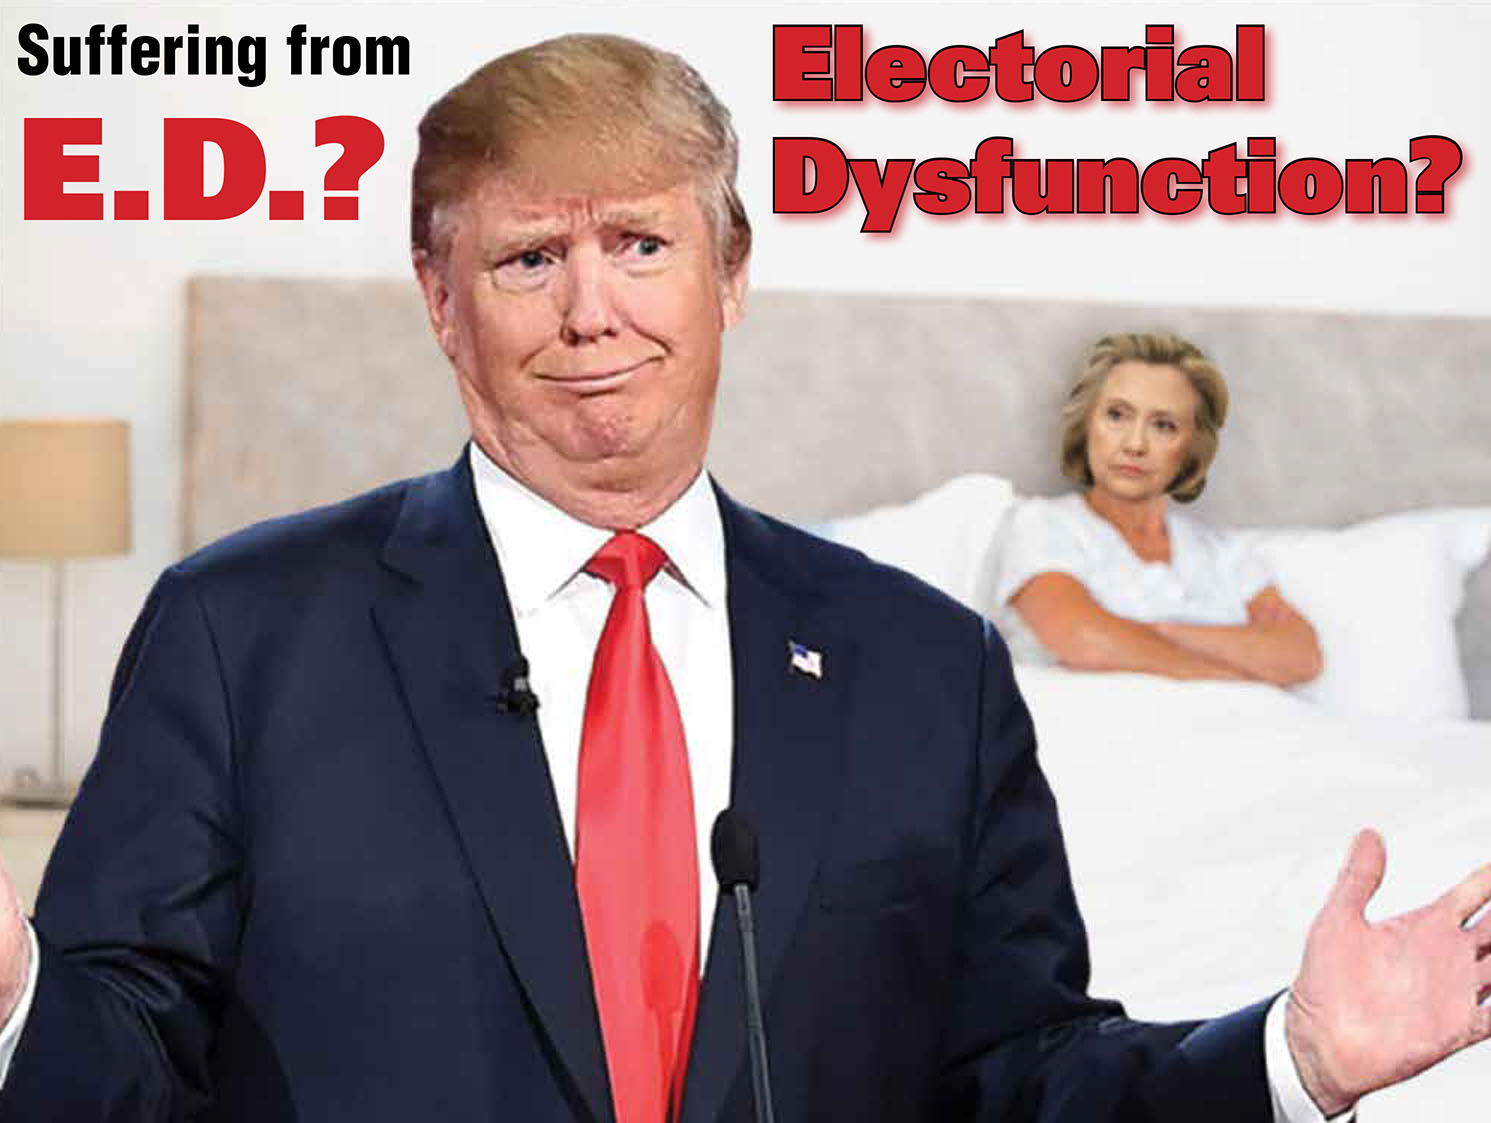 ED? Electorial Dysfunction?